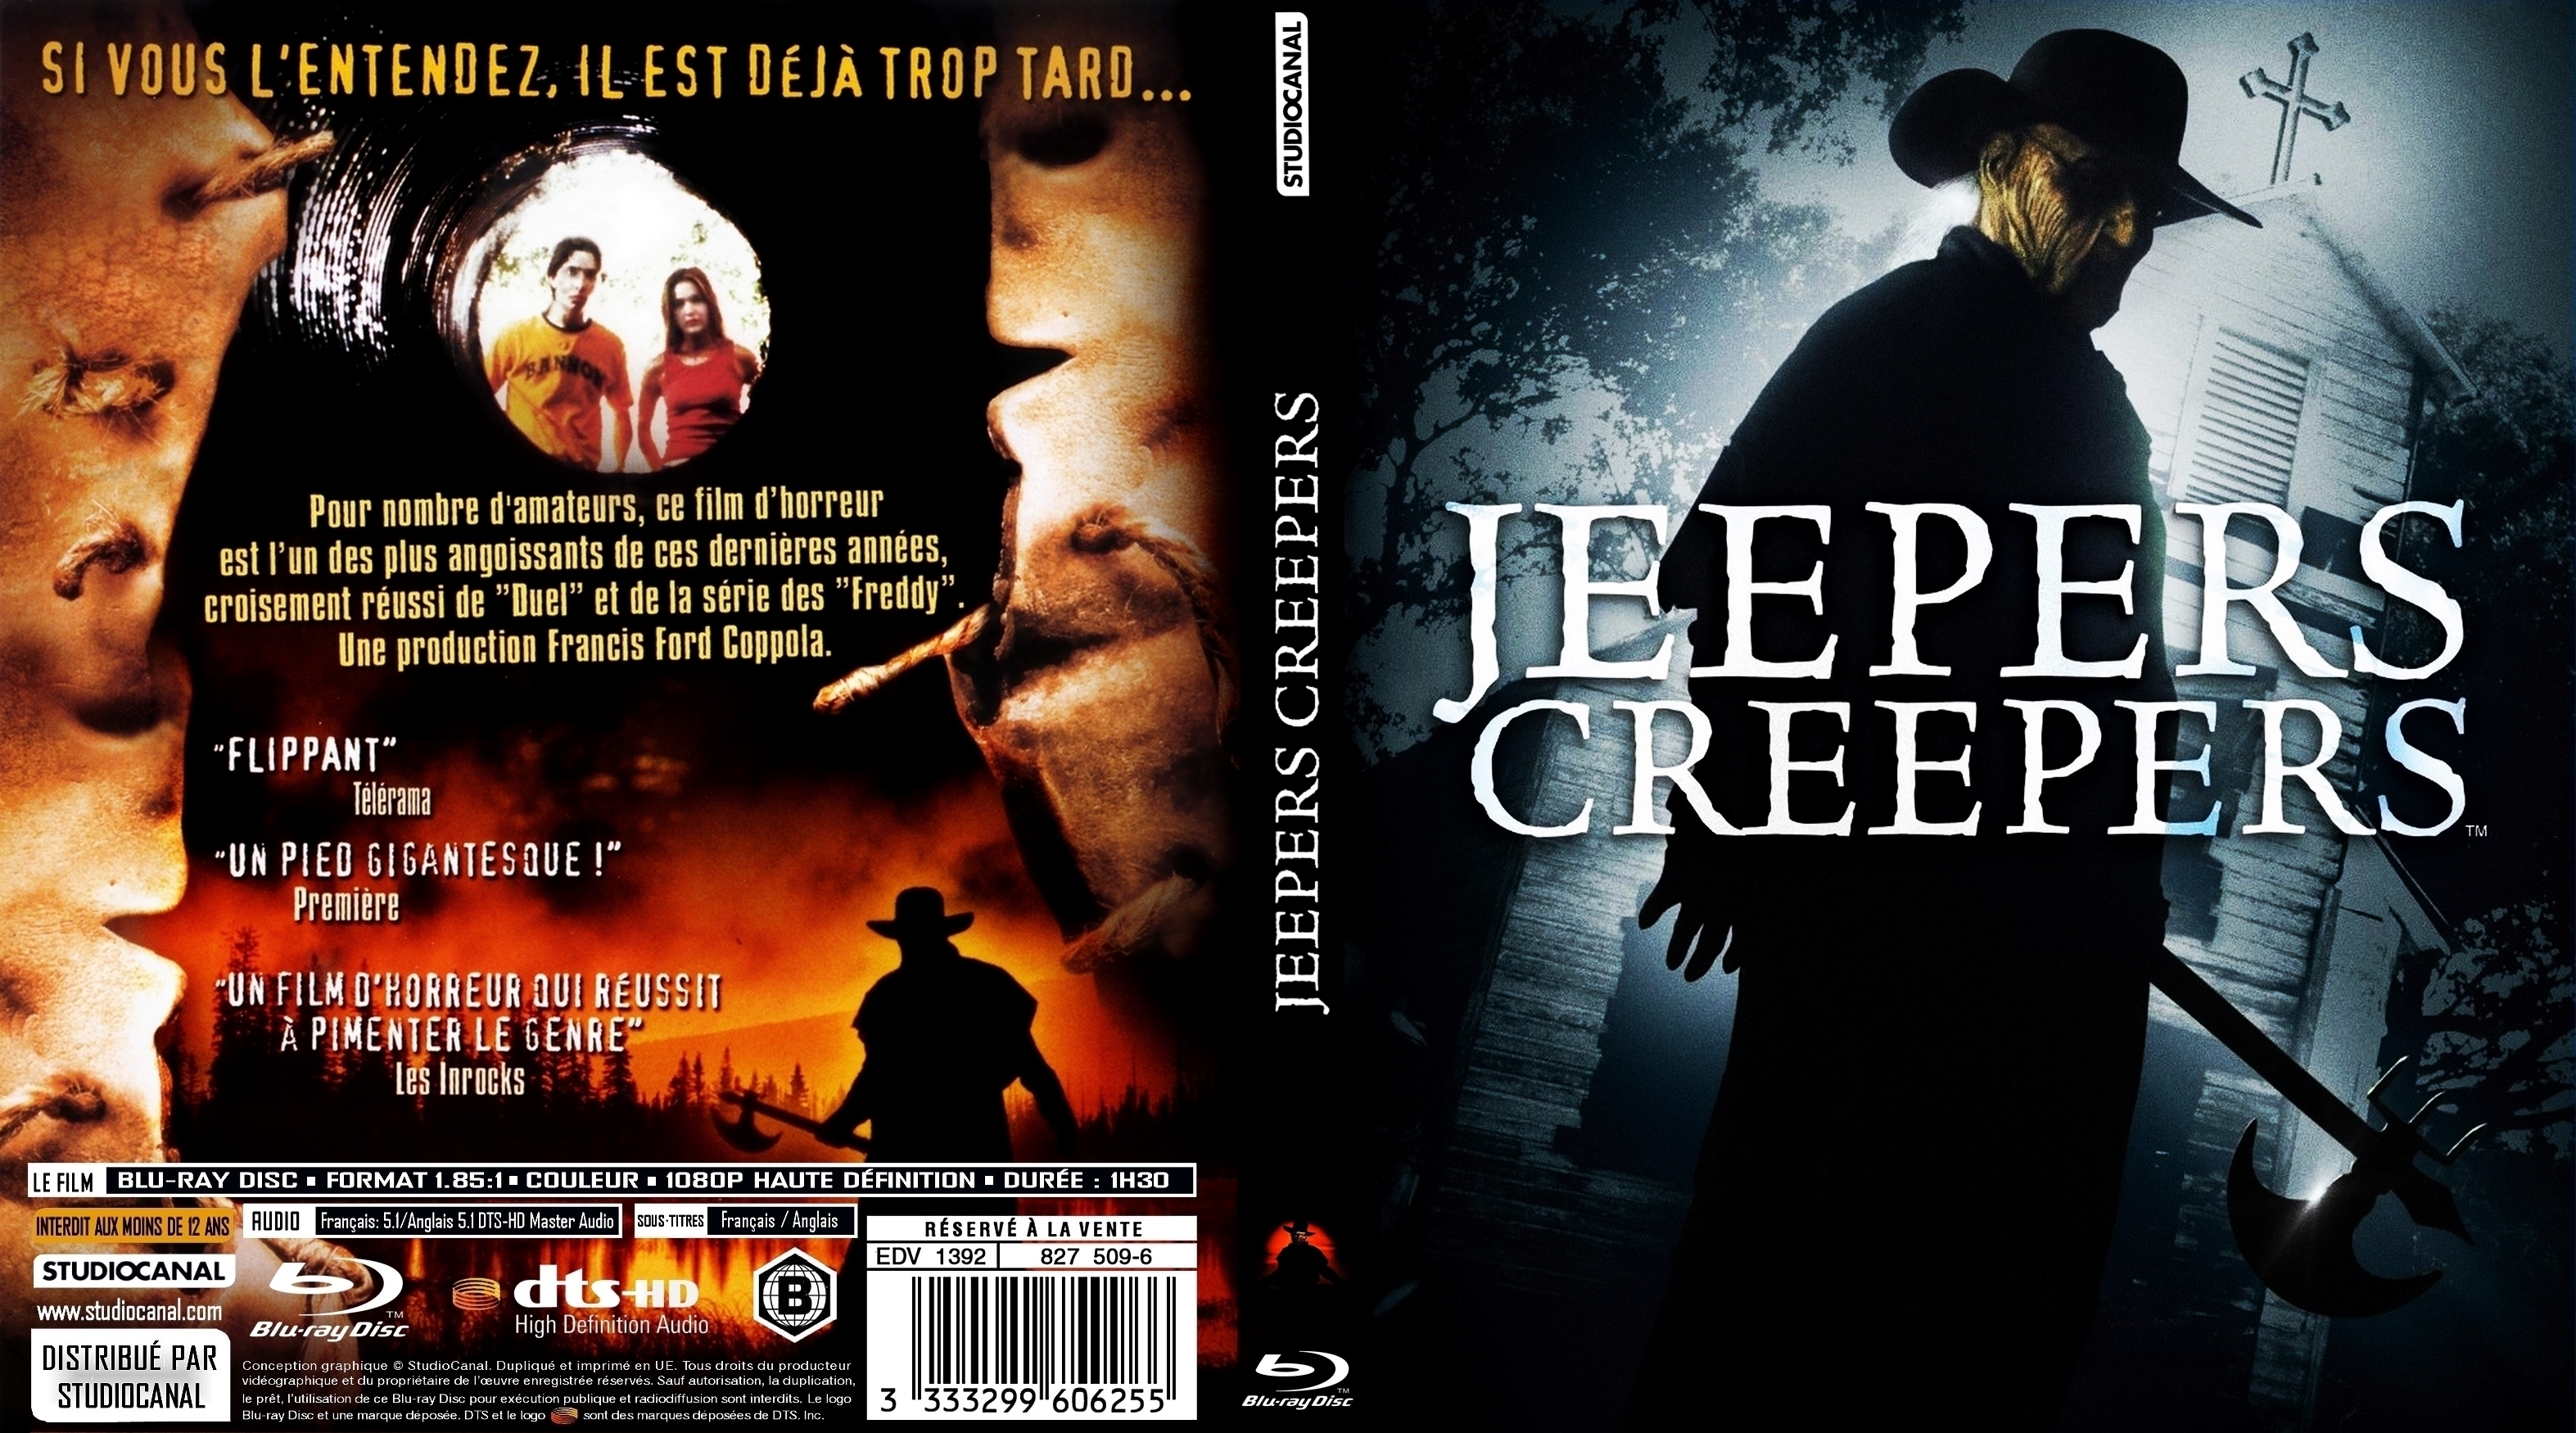 Jaquette DVD Jeepers Creepers (BLU-RAY)